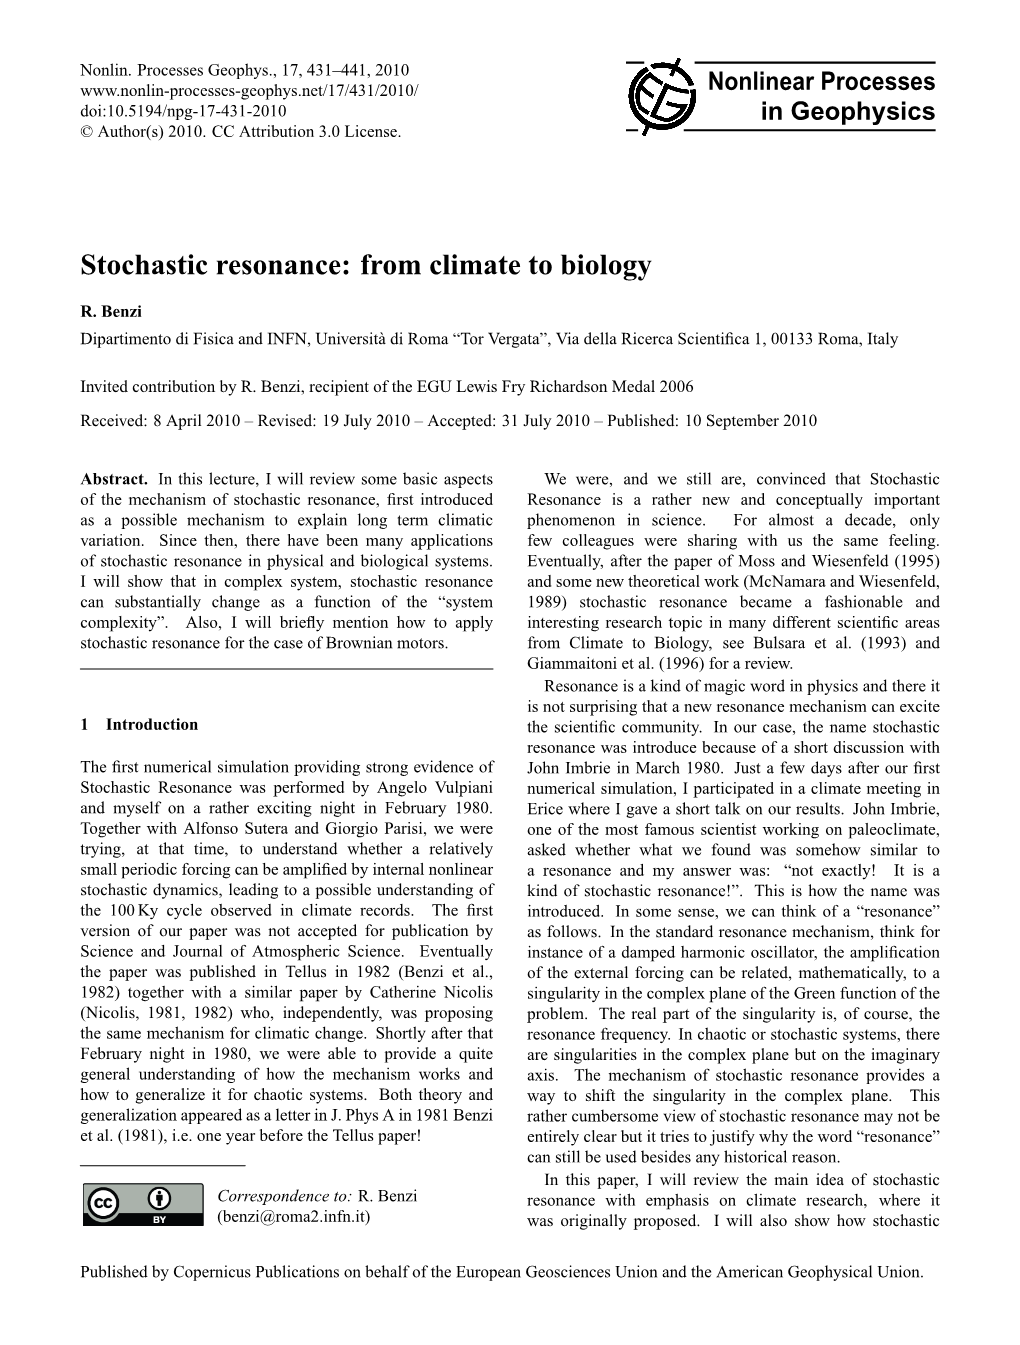 Stochastic Resonance: from Climate to Biology